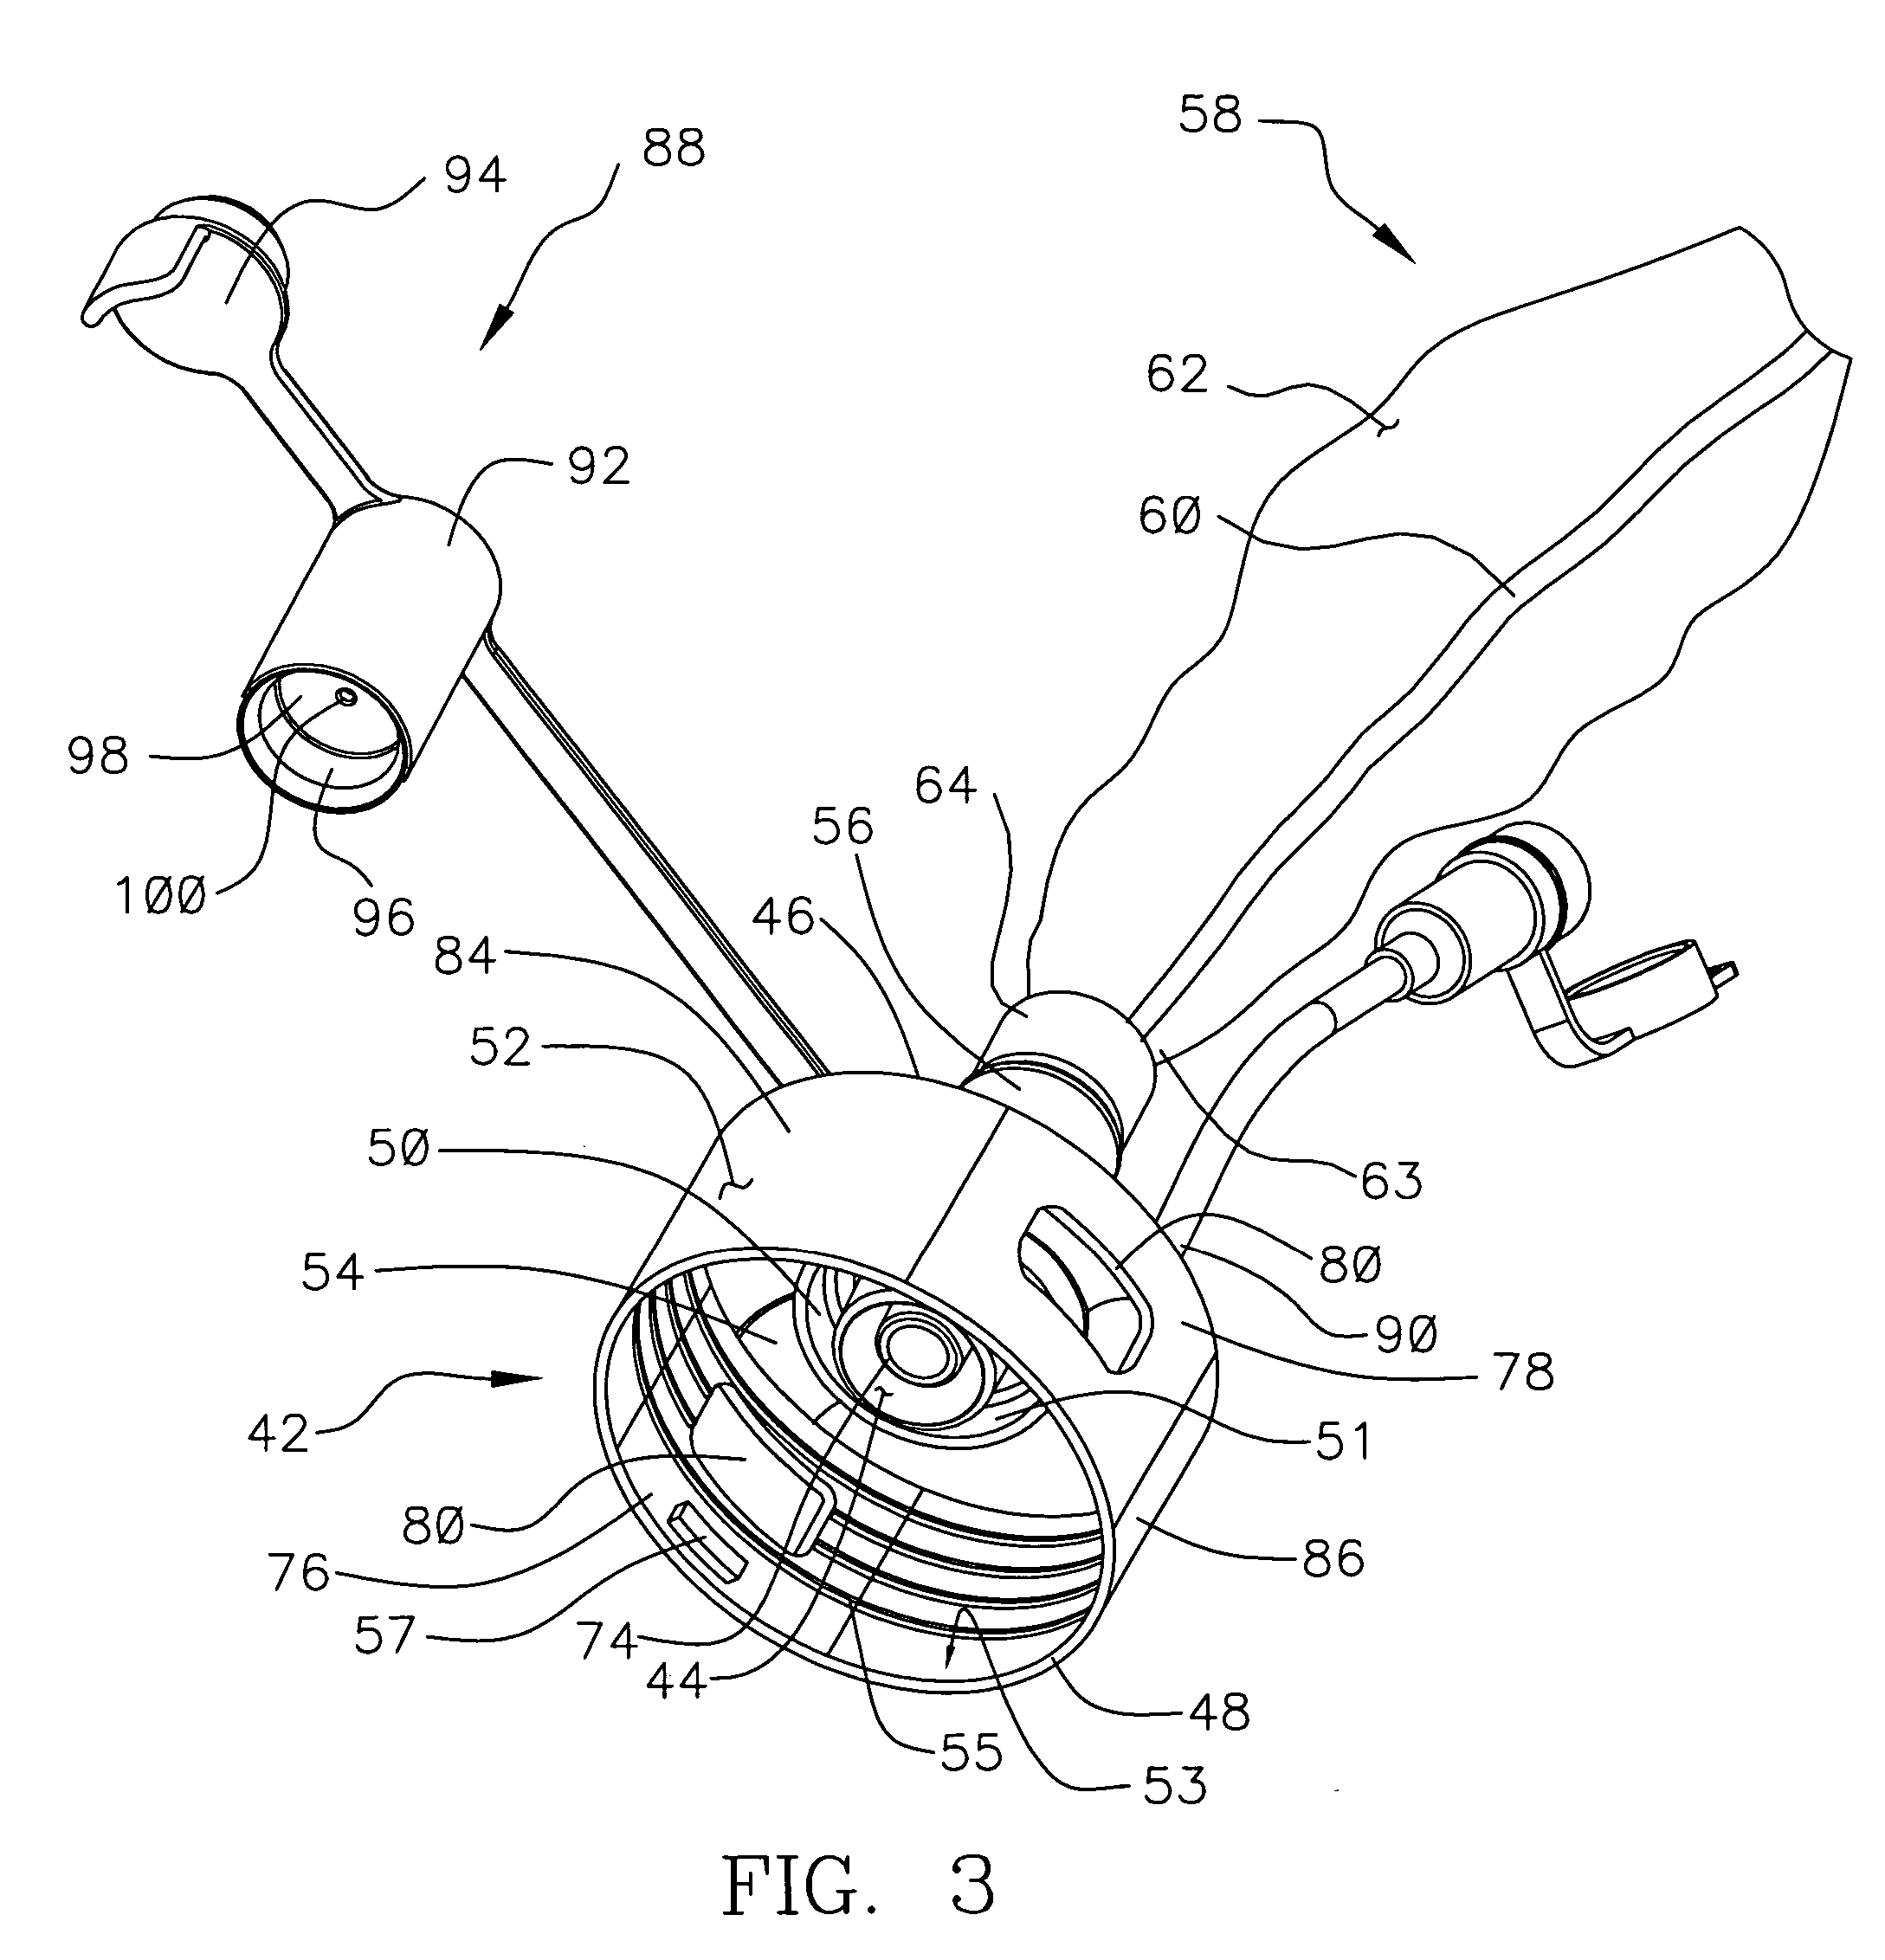 Heat and moisture exchanger adaptor for closed suction catheter assembly and system containing the same